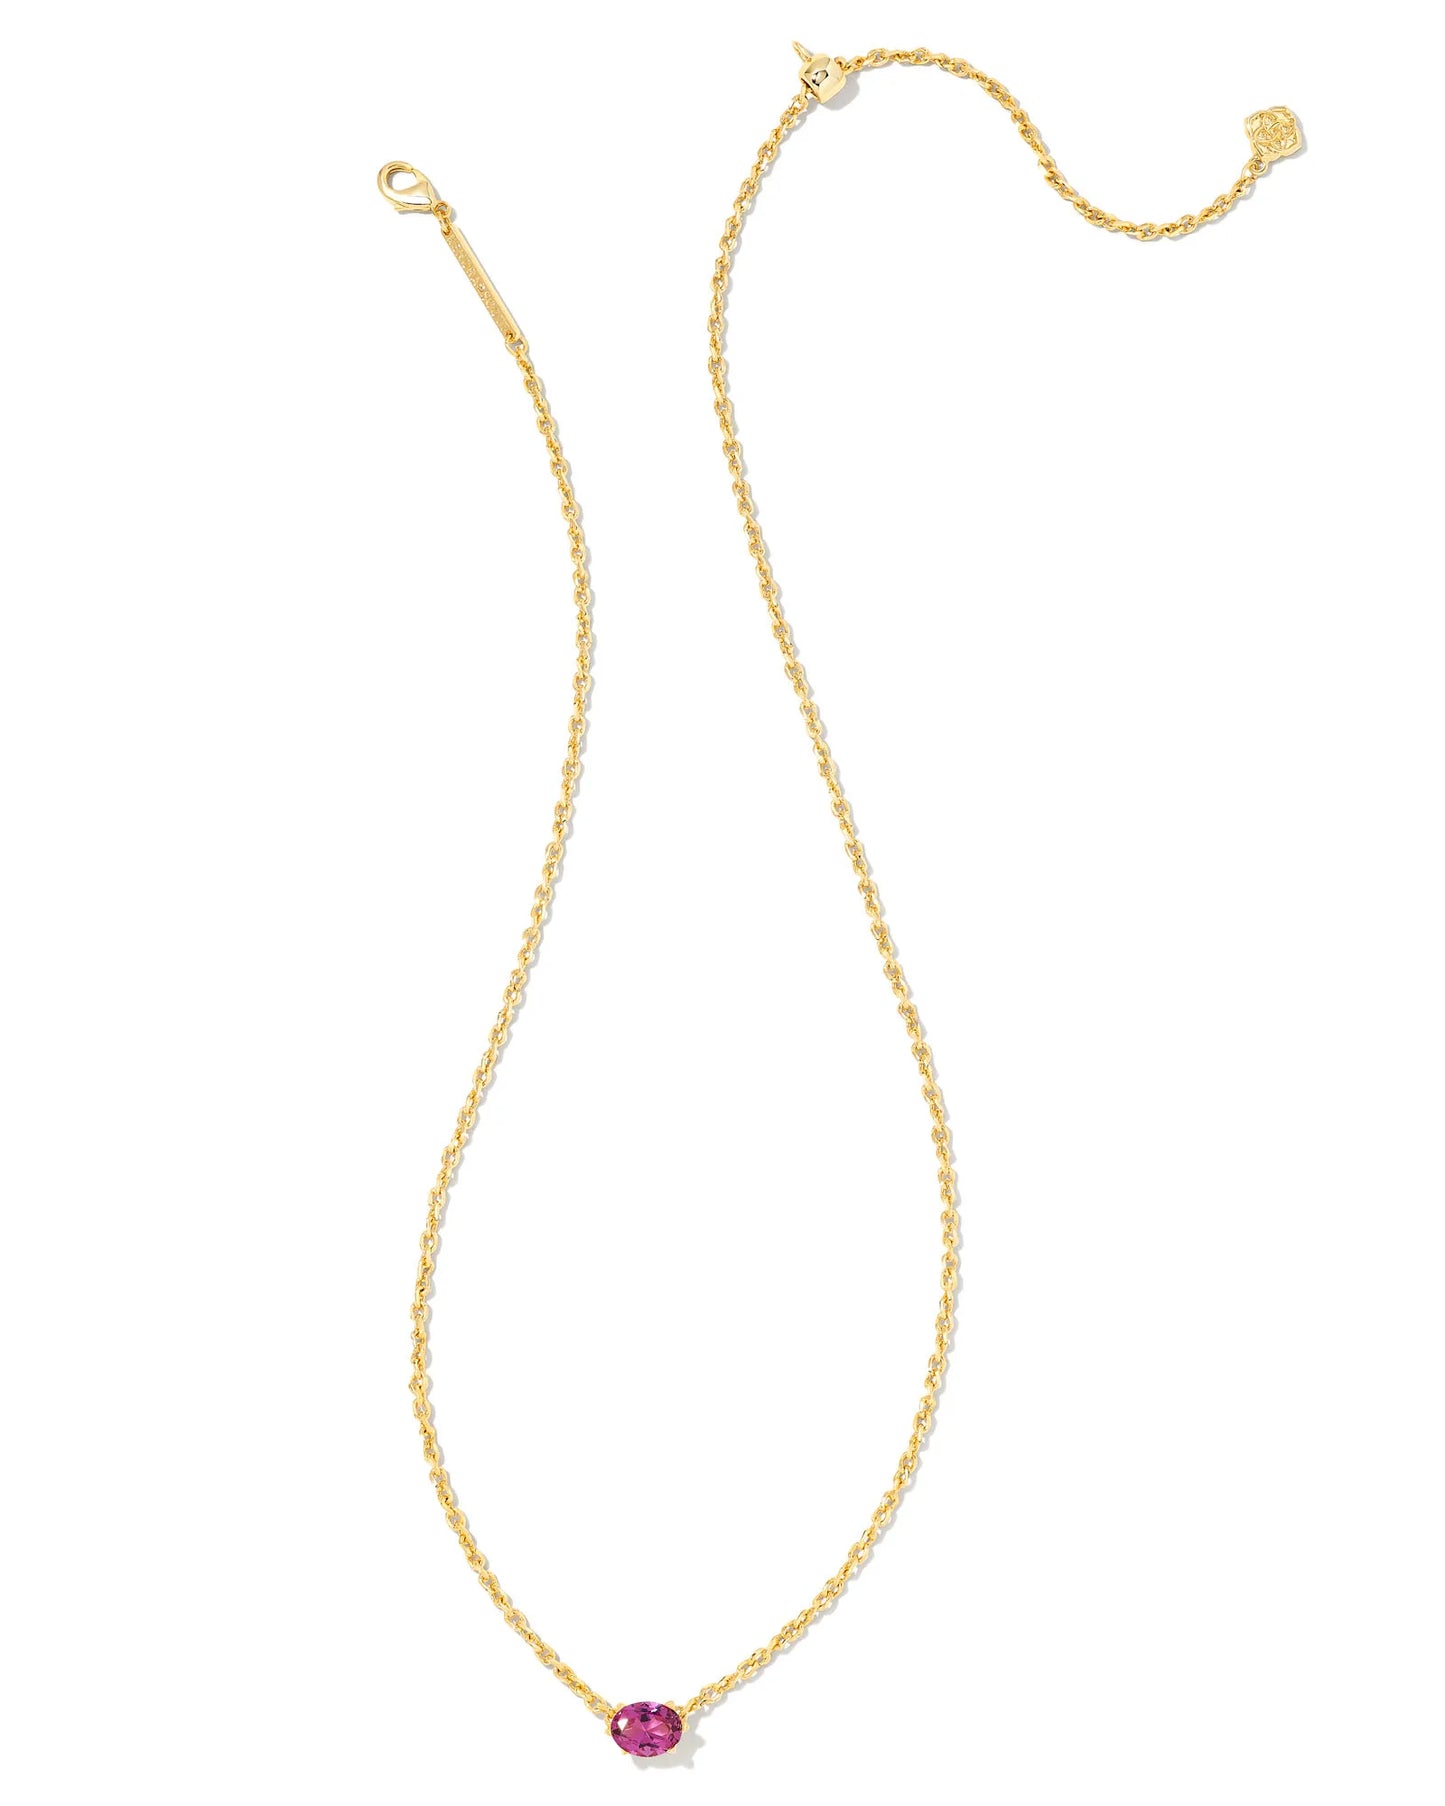 Kendra Scott Cailin Crystal Pendant Necklace Gold Purple Crystal-Necklaces-Kendra Scott-N1941GLD-The Twisted Chandelier